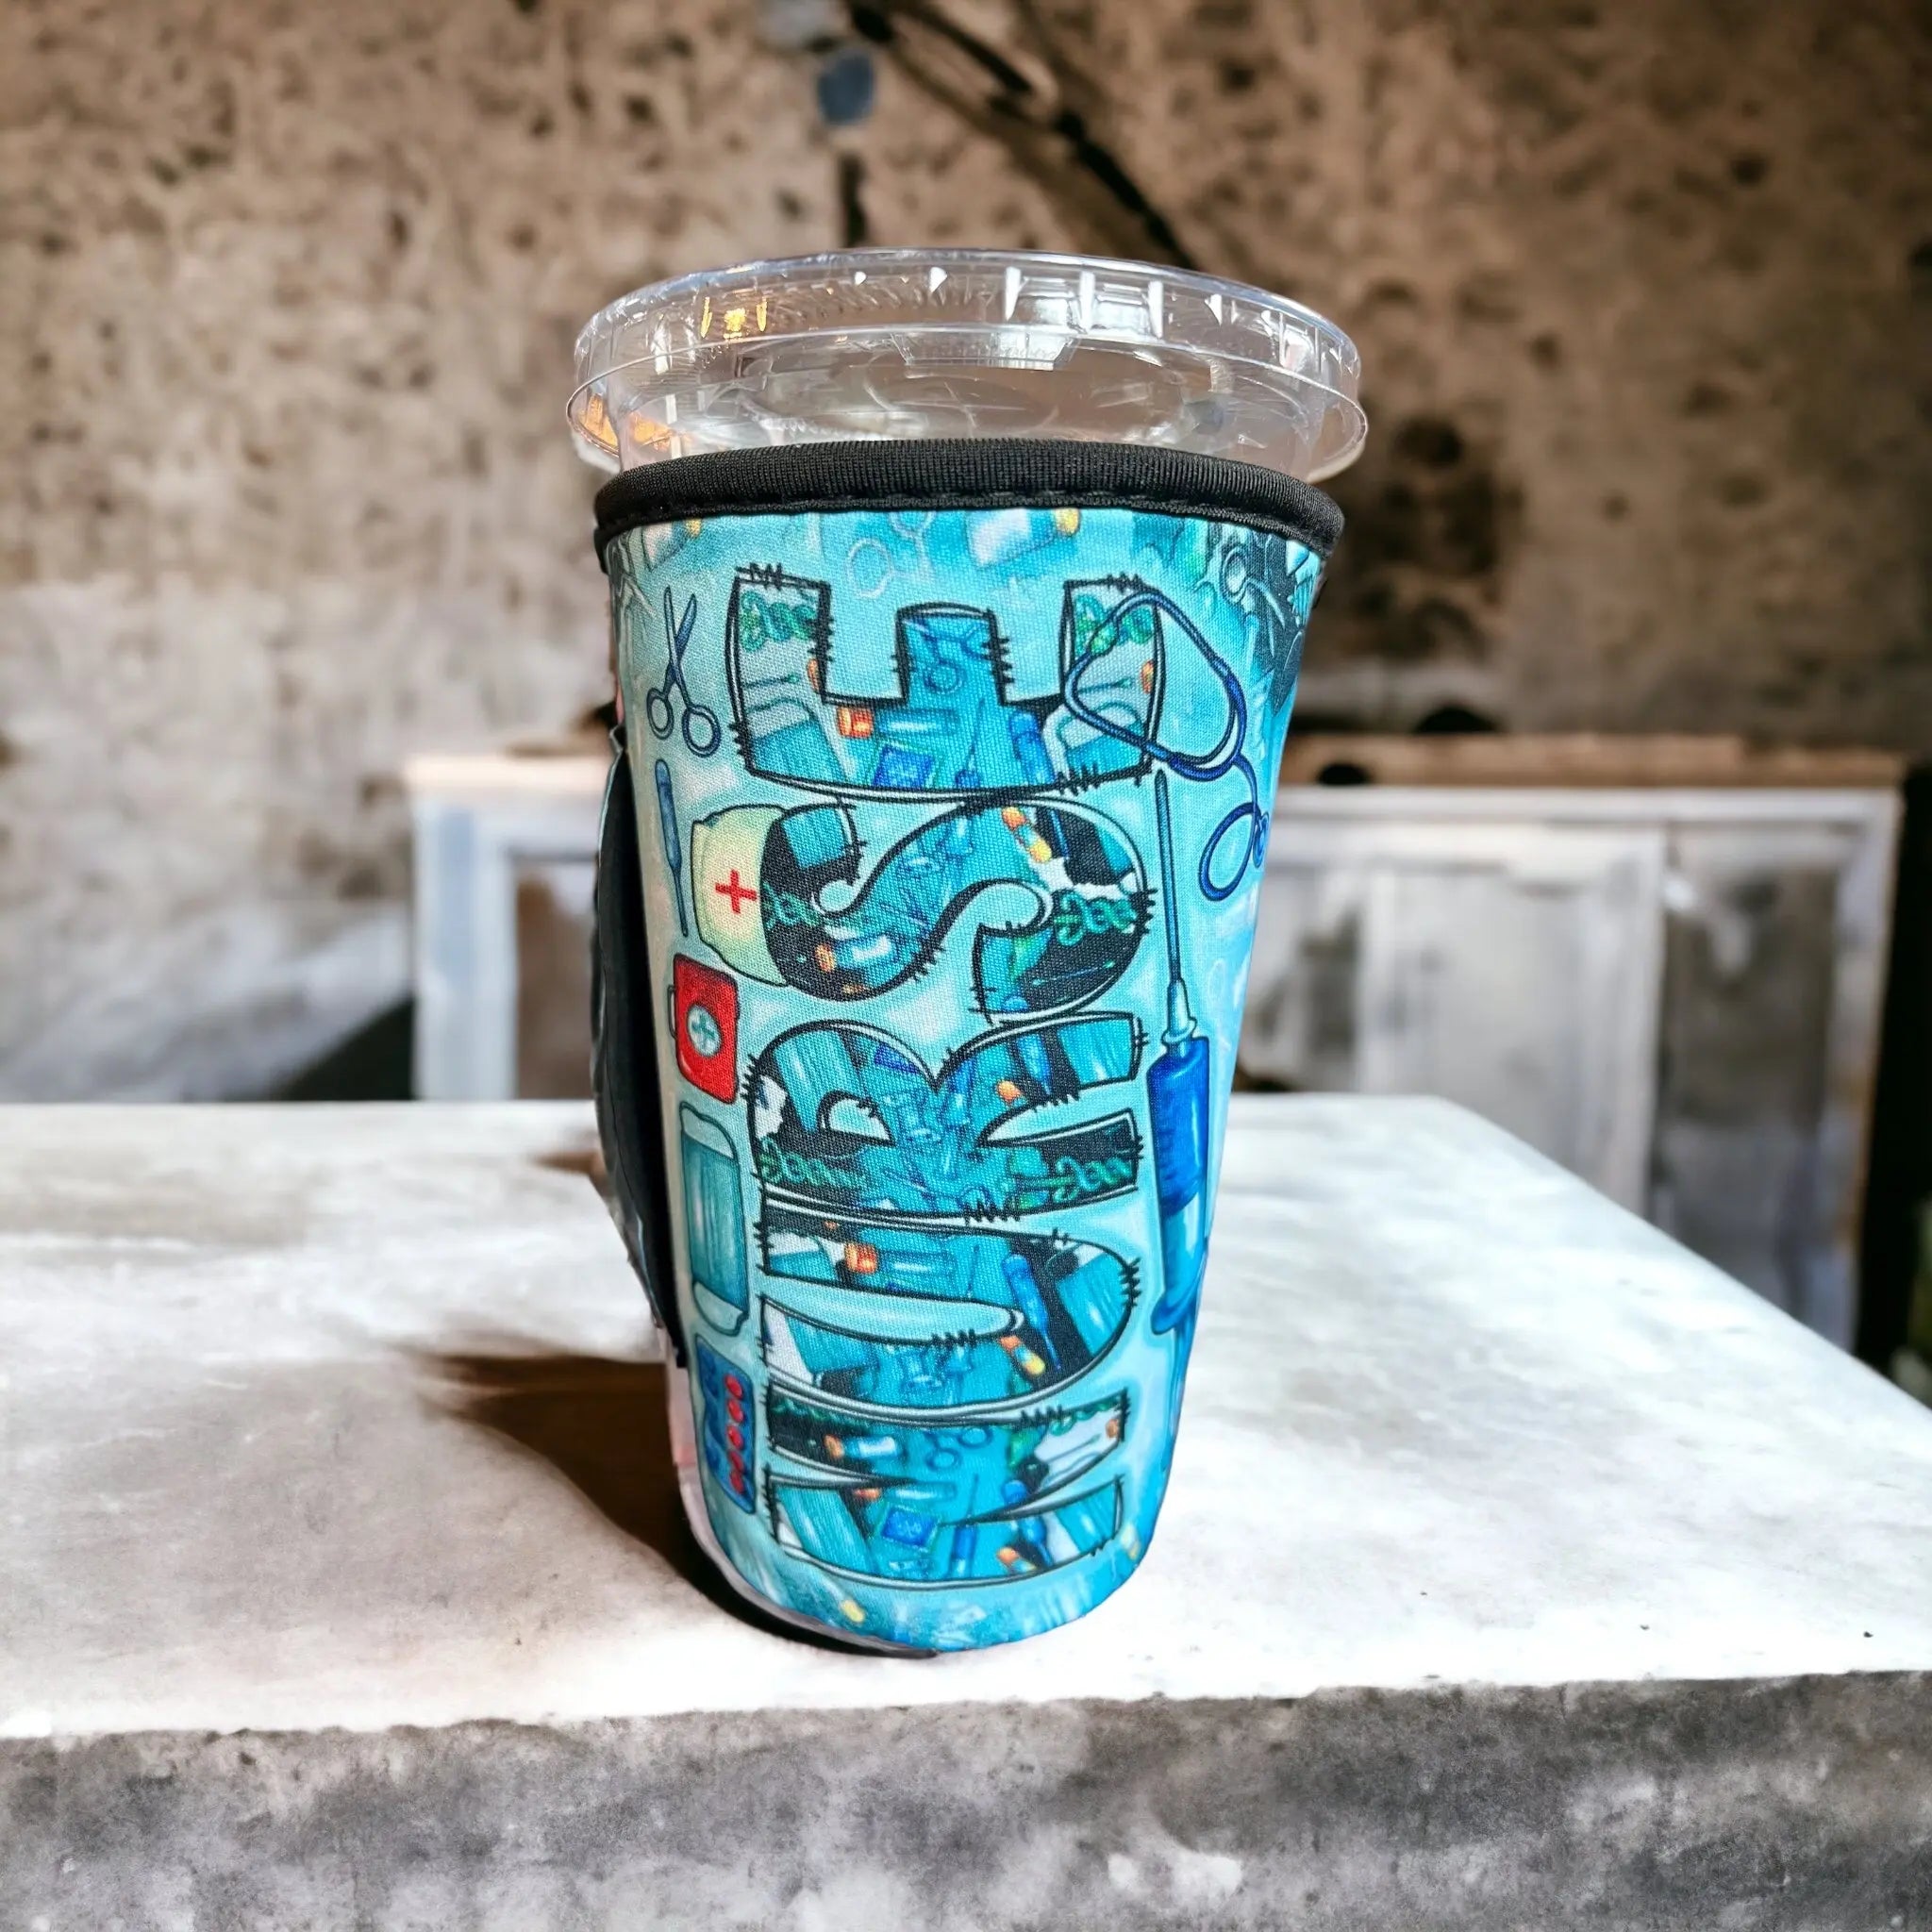 Teal Bull Skull Personalized 20oz Insulated Tumbler with Lid and Straw